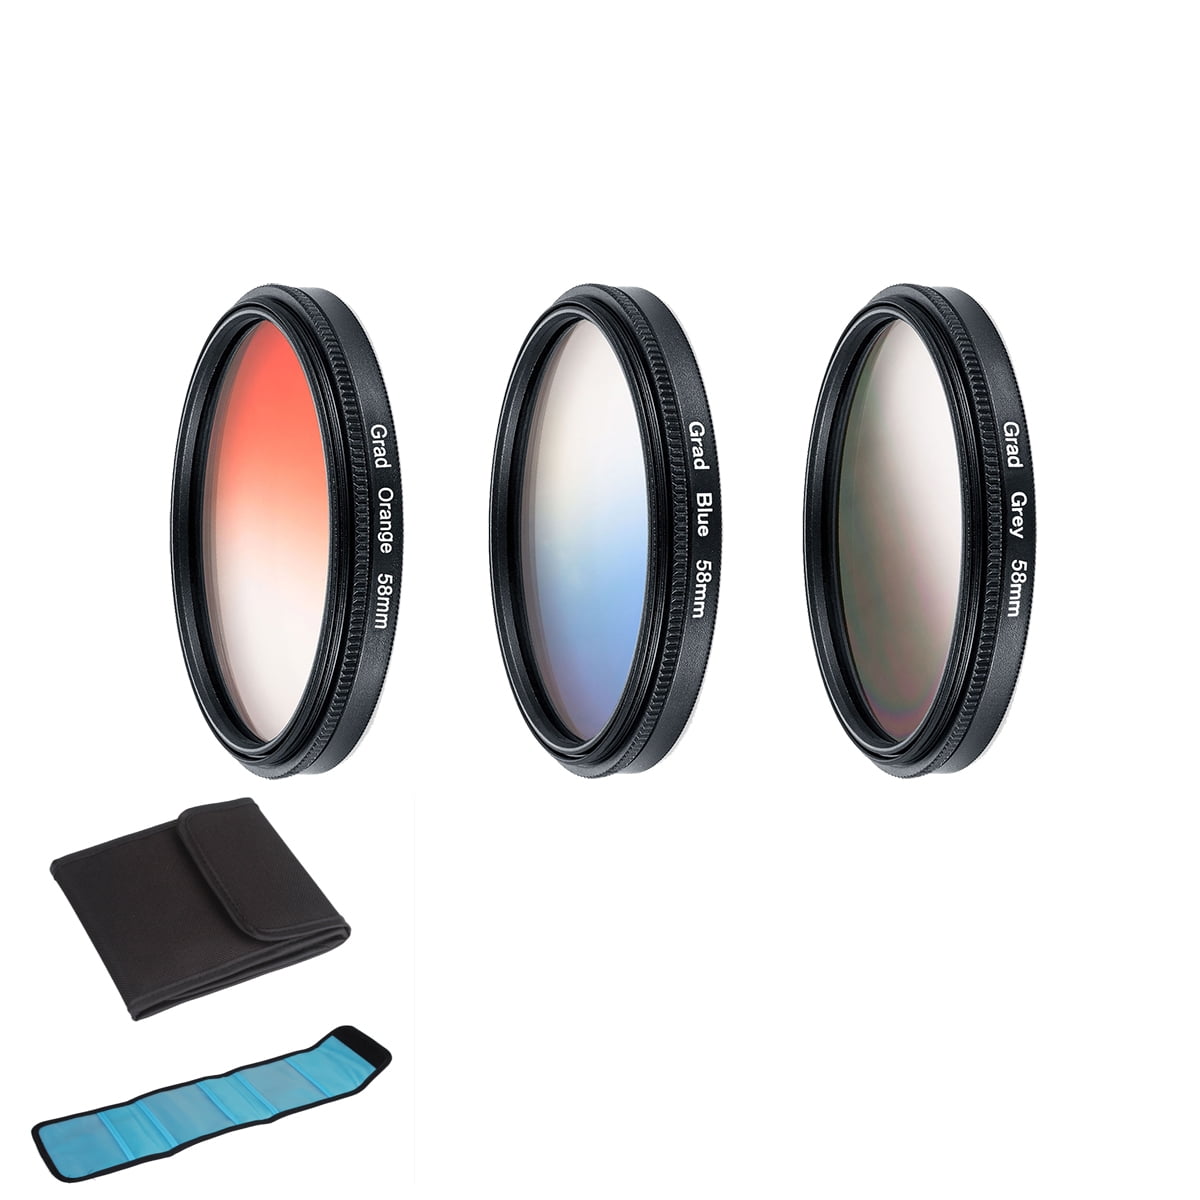 RONSHIN Like for Mini Ultrathin Camera Lens Filter for Cannon Nikon Sony Photographic Accessories 58MM